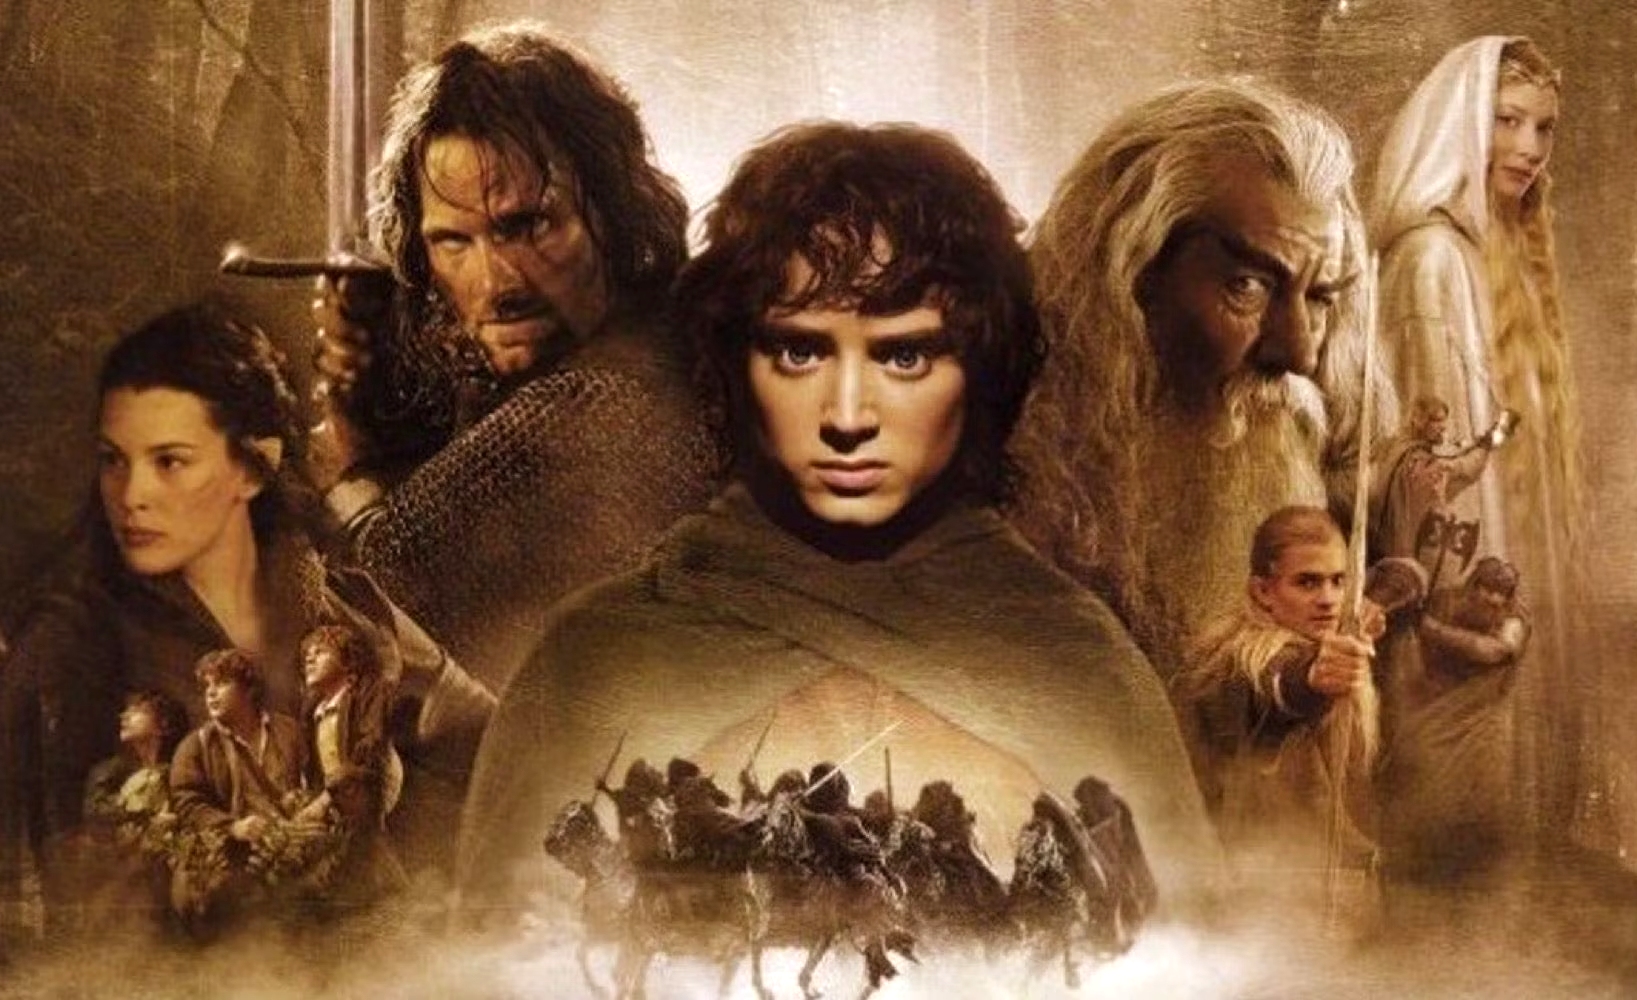 LORD OF THE RINGS SPECIAL PREMIERE ISSUE Dec. 2003/Jan. 2004